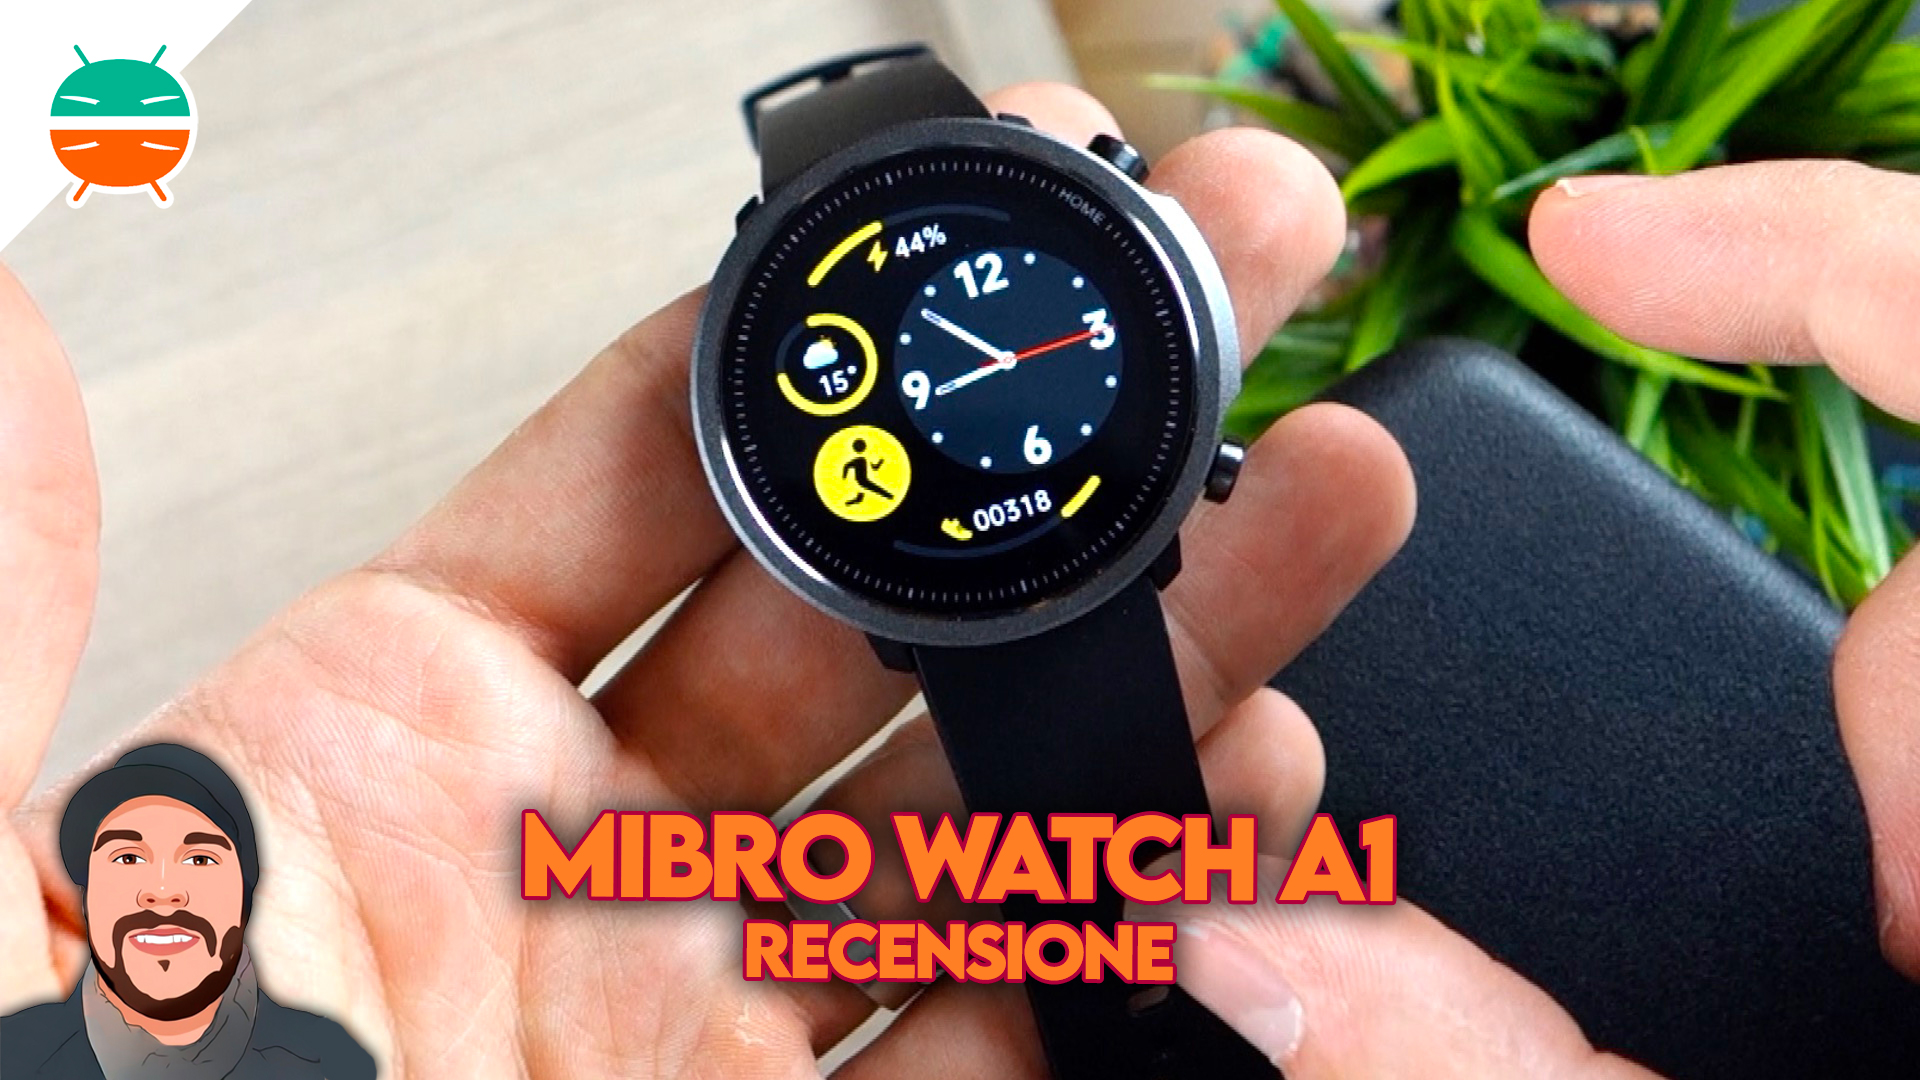 Mibro Watch A1 review: thin and light, but there's more 